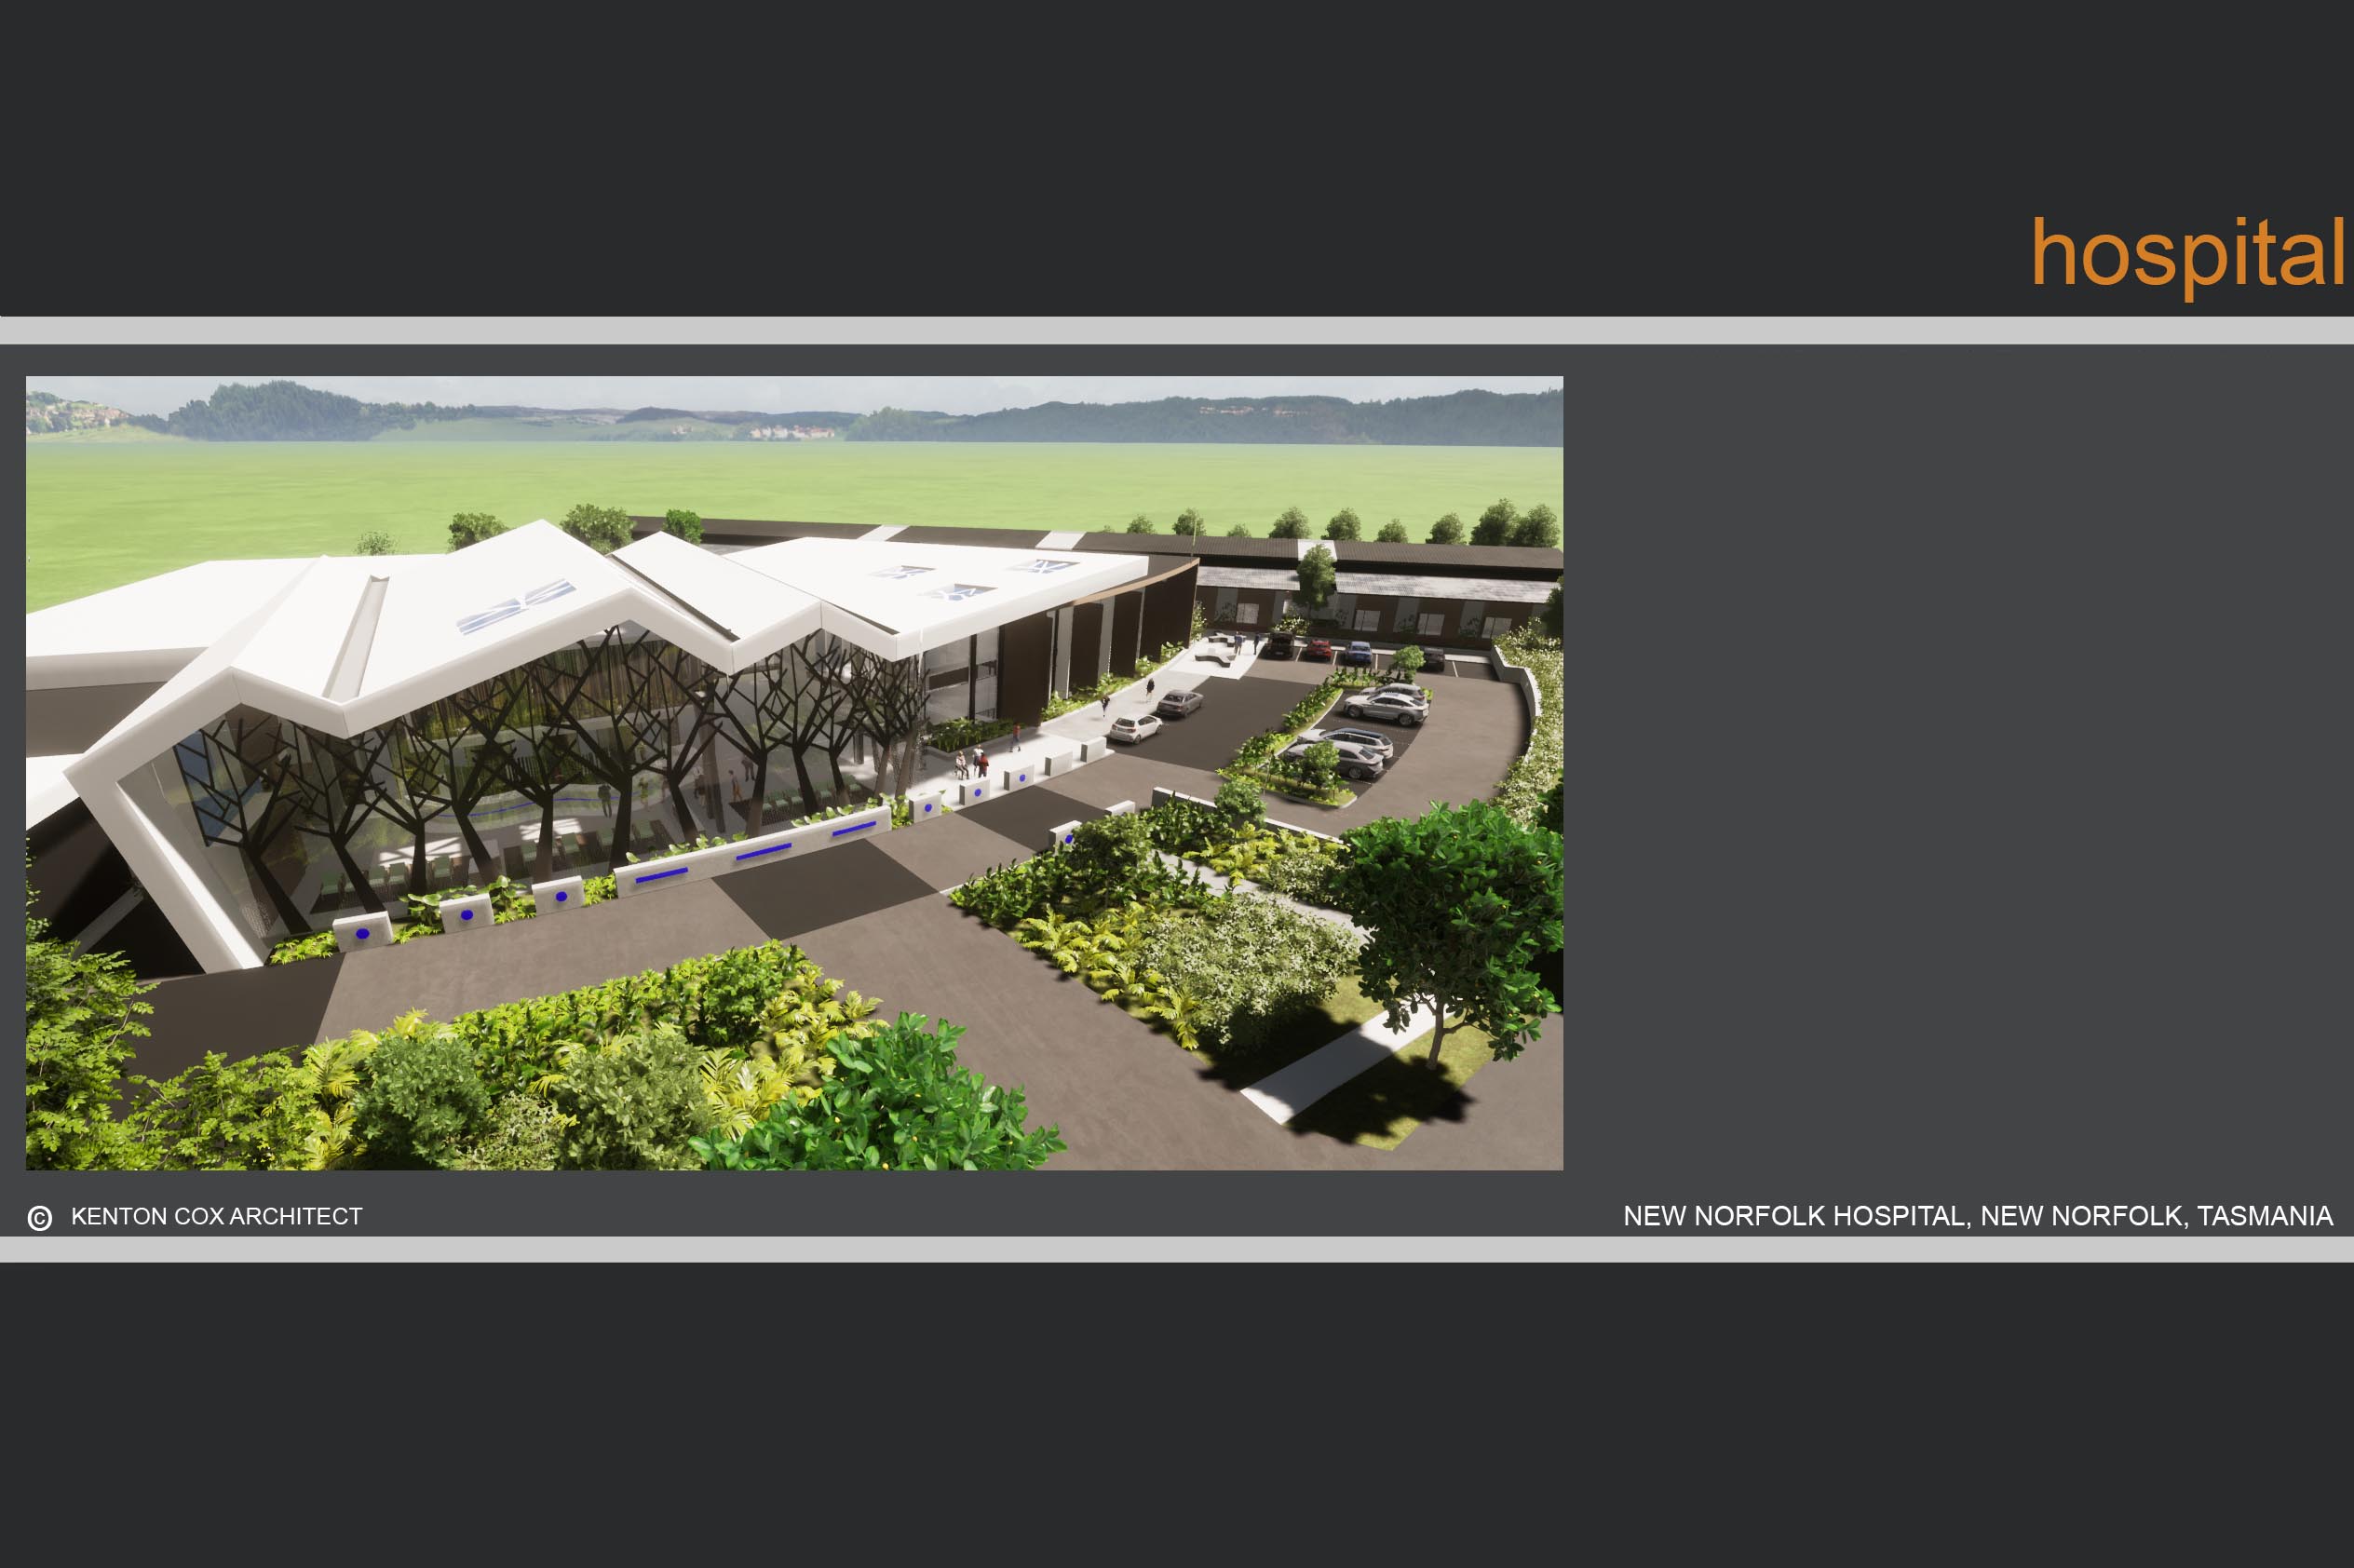 Proposed new Hospital for The Mills New Norfolk, Tasmania